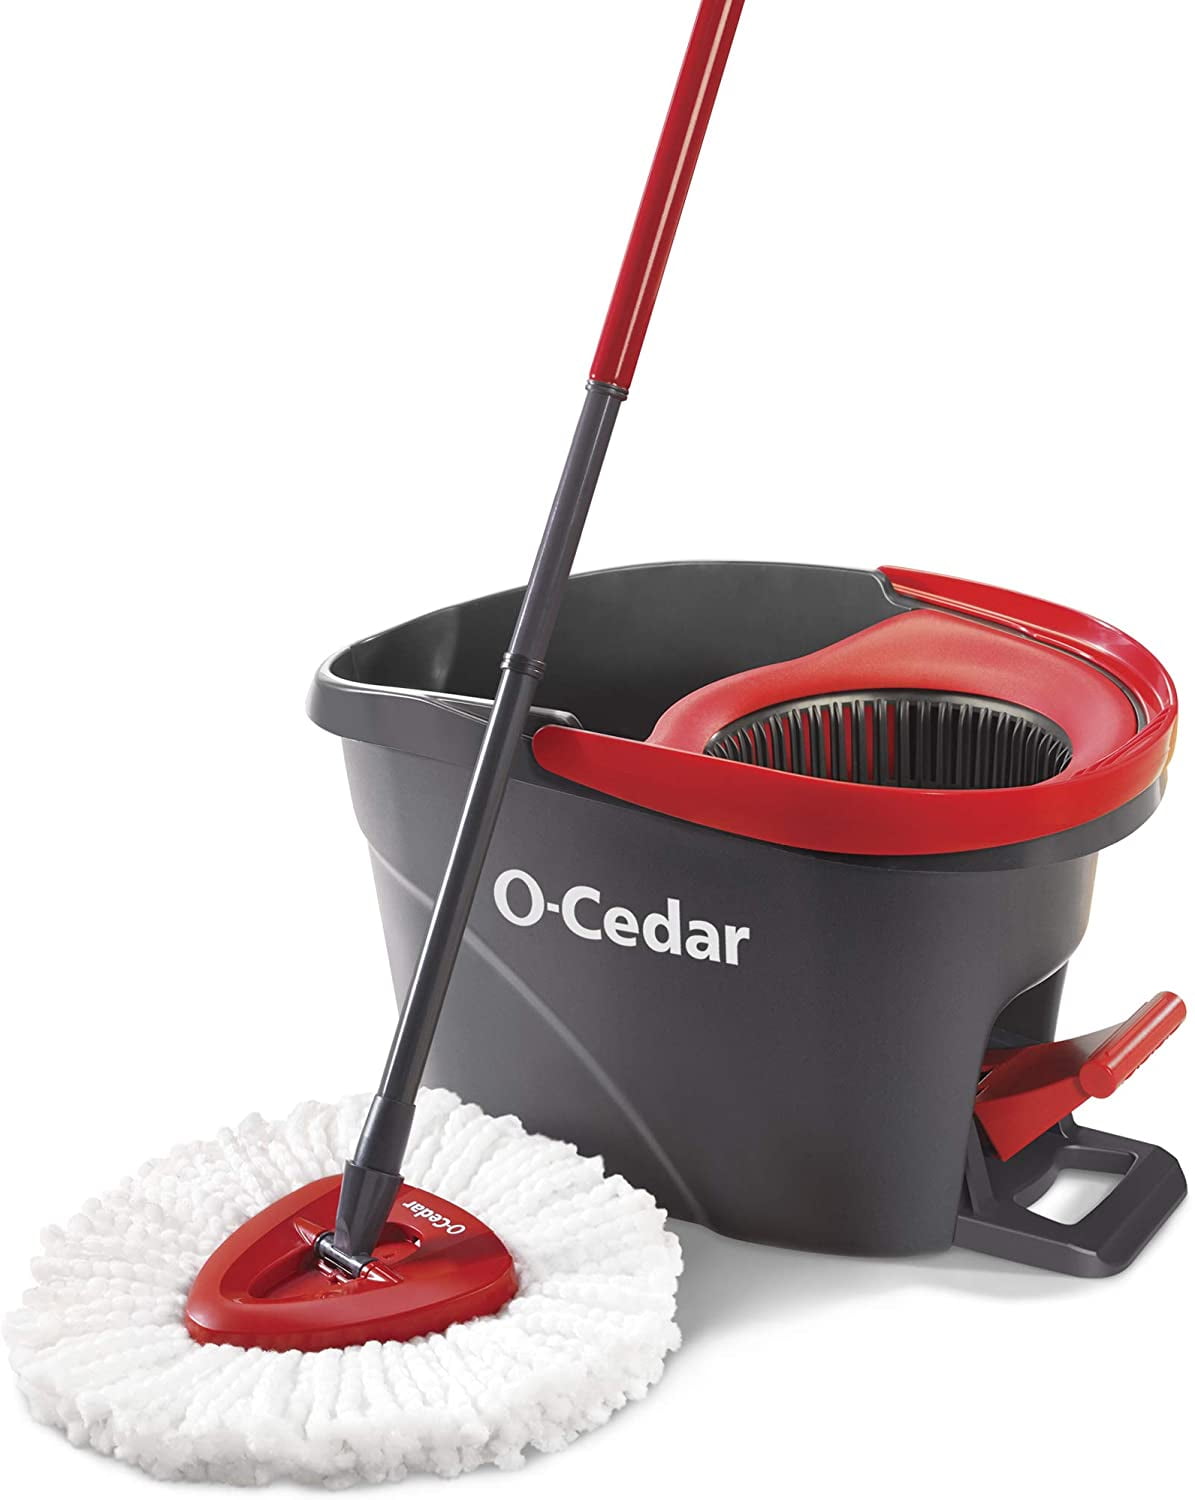 O-Cedar Easywring Microfiber Spin Mop And Bucket Floor Cleaning System 